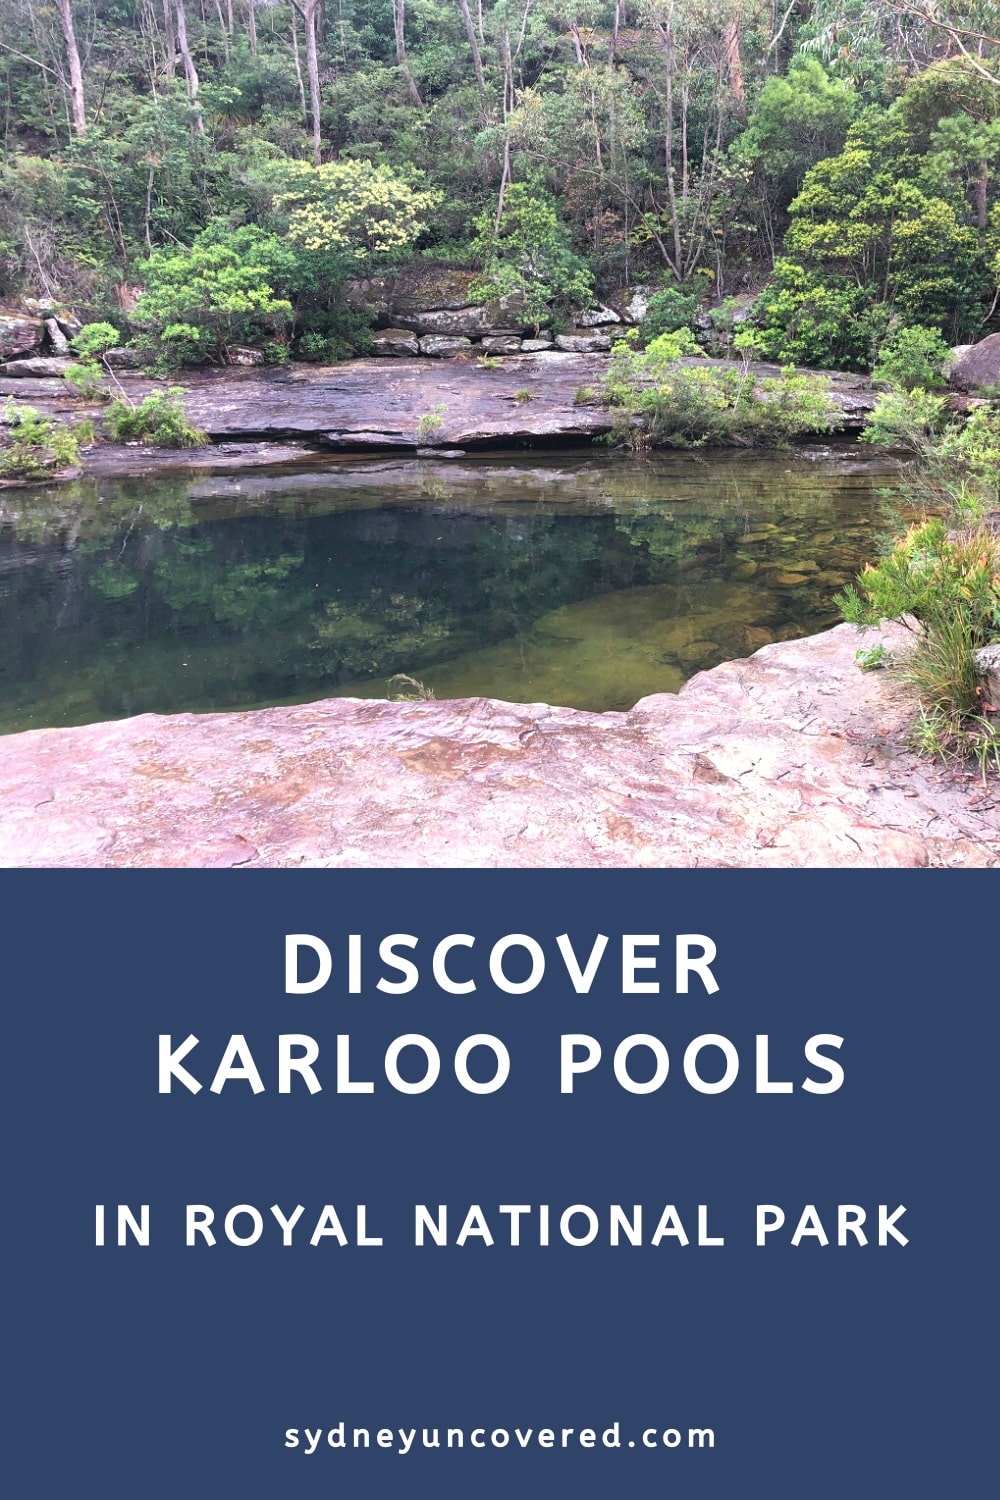 Discover Karloo Pools in Royal National Park